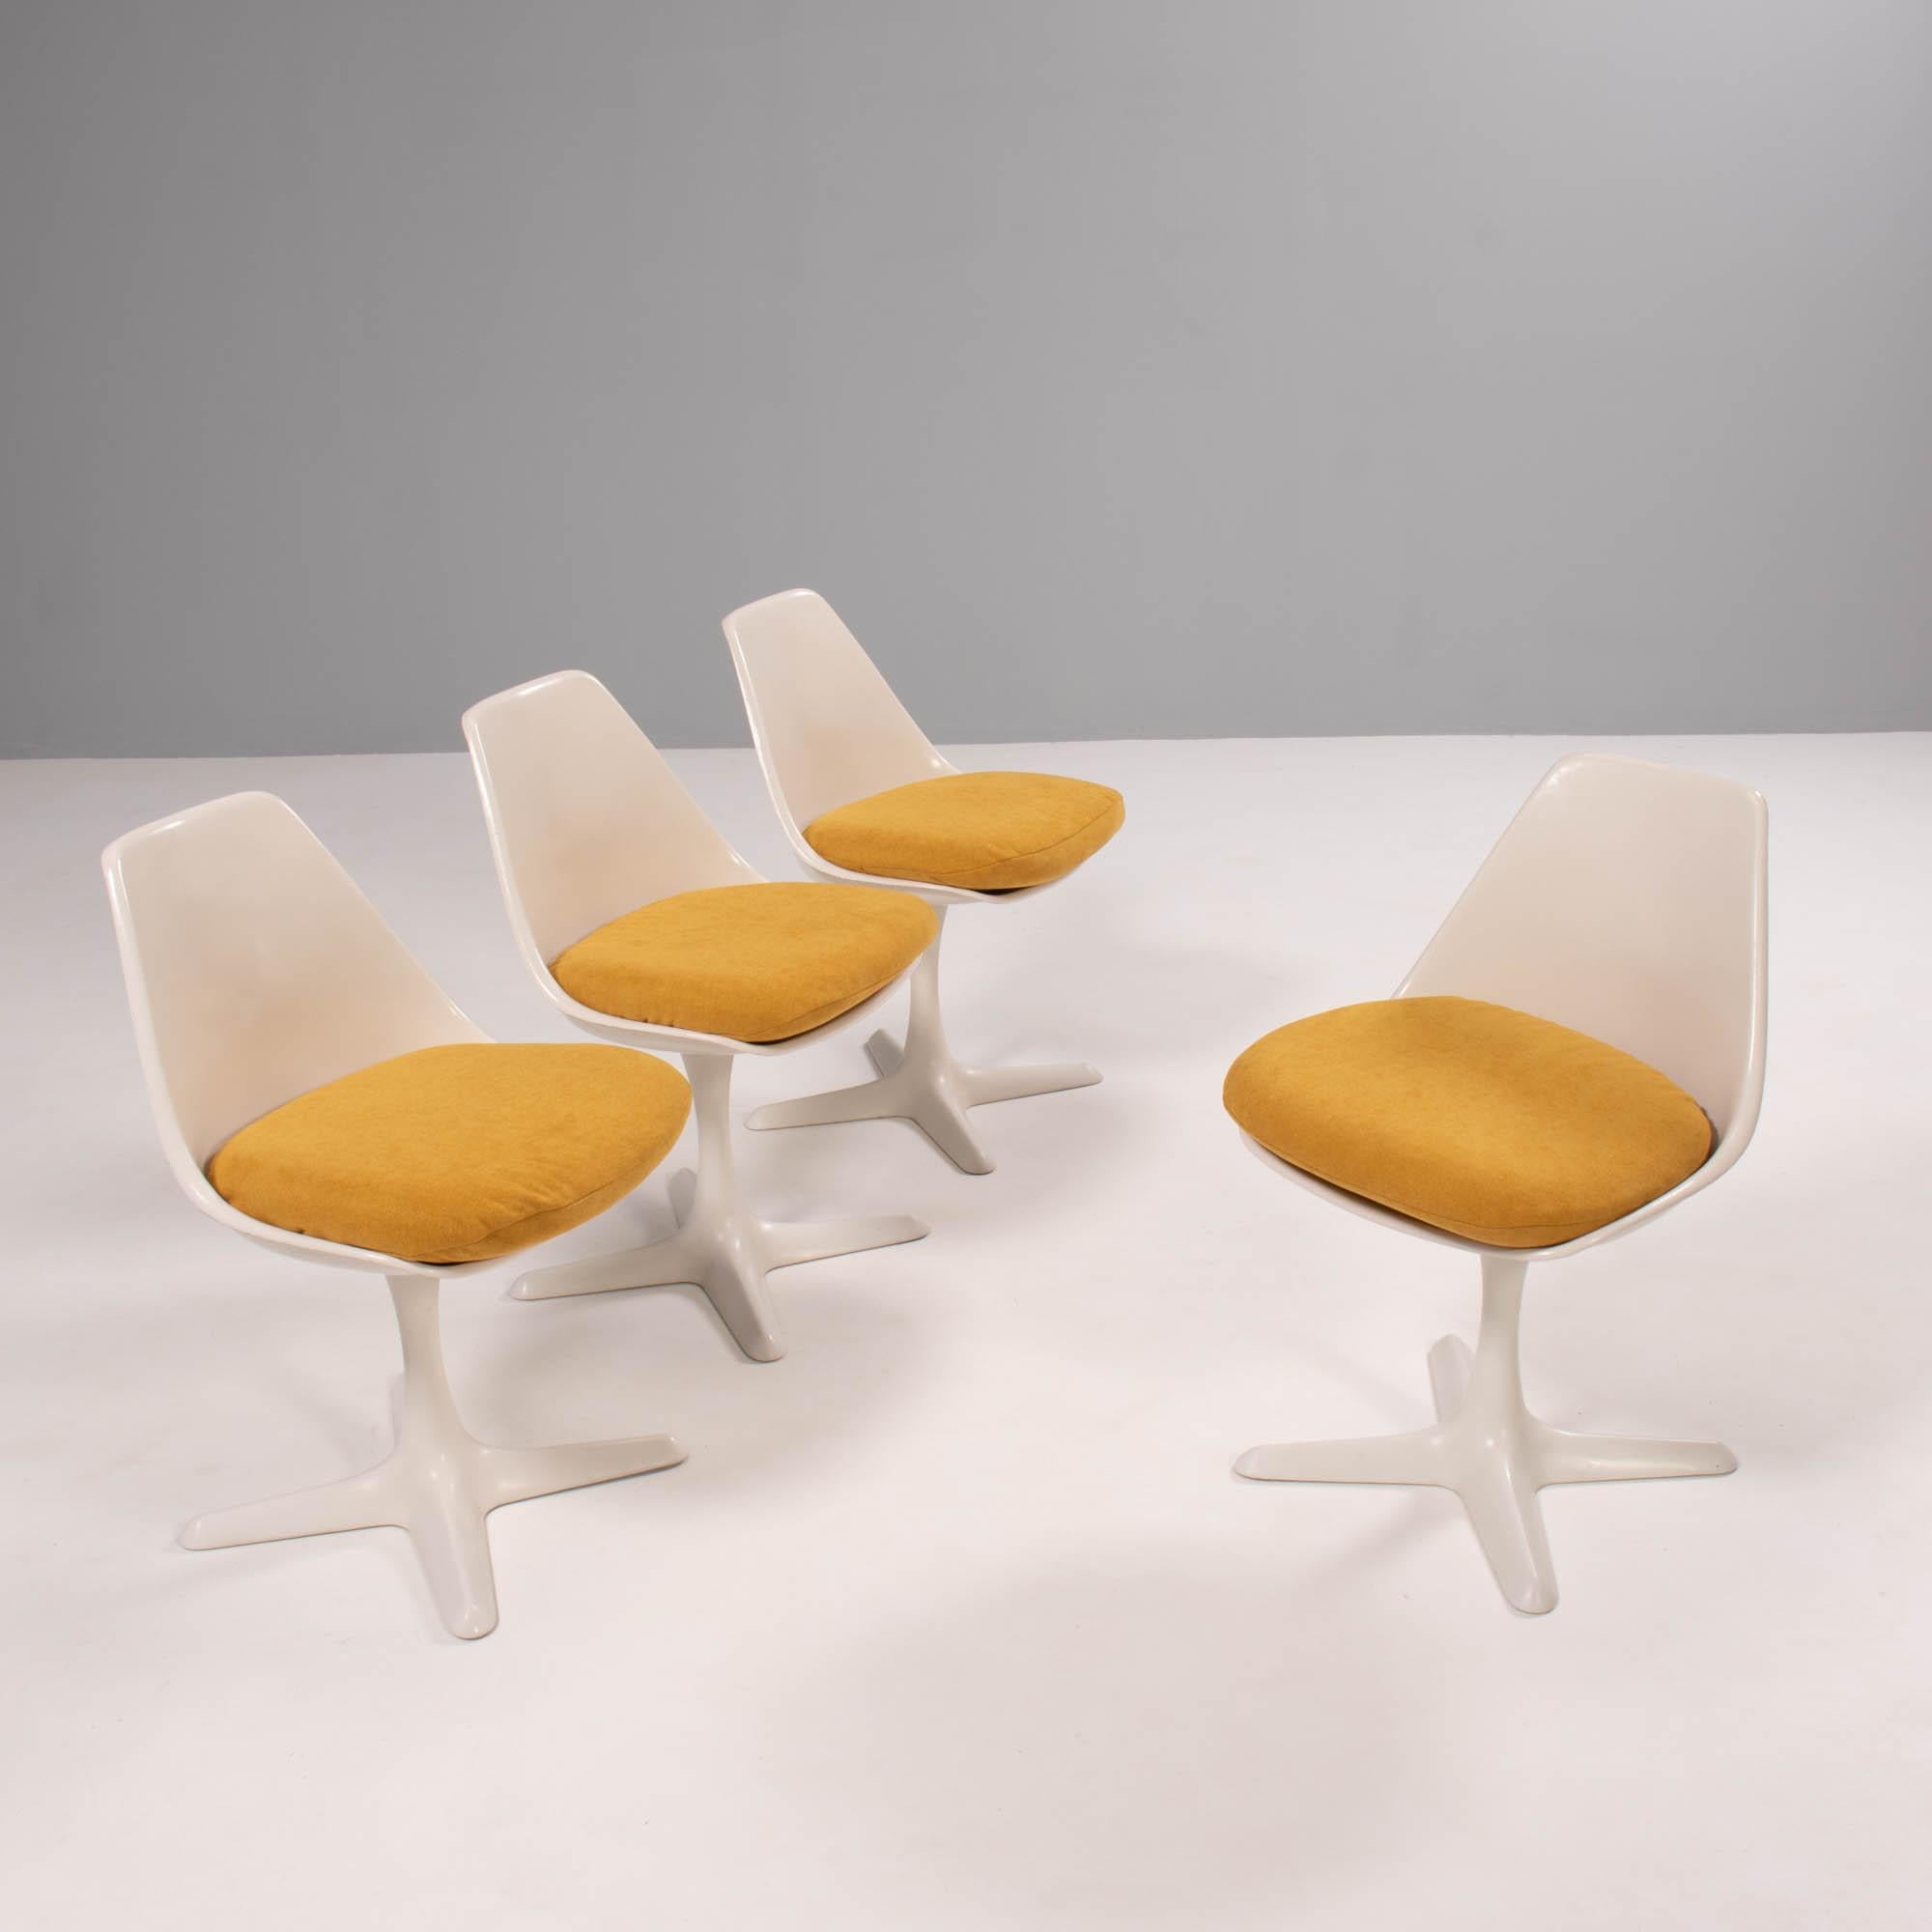 Arkana White Dining Table and Four Arkana 115 Yellow Dining Chairs Set 2